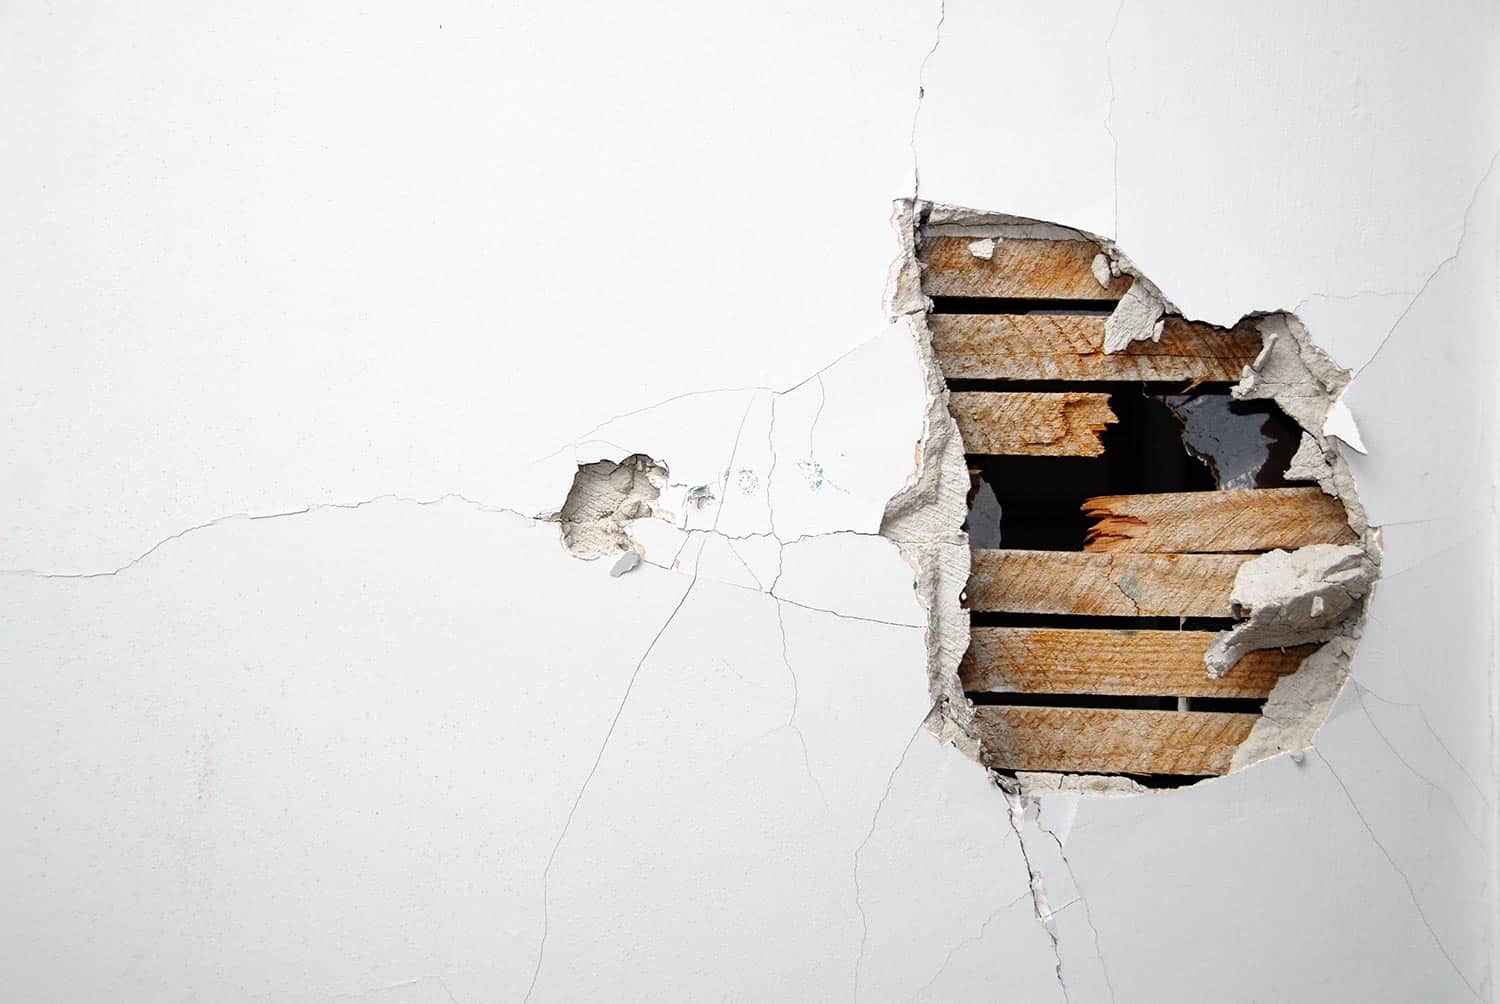 Cracked plaster drywall and wood of a home's white wall